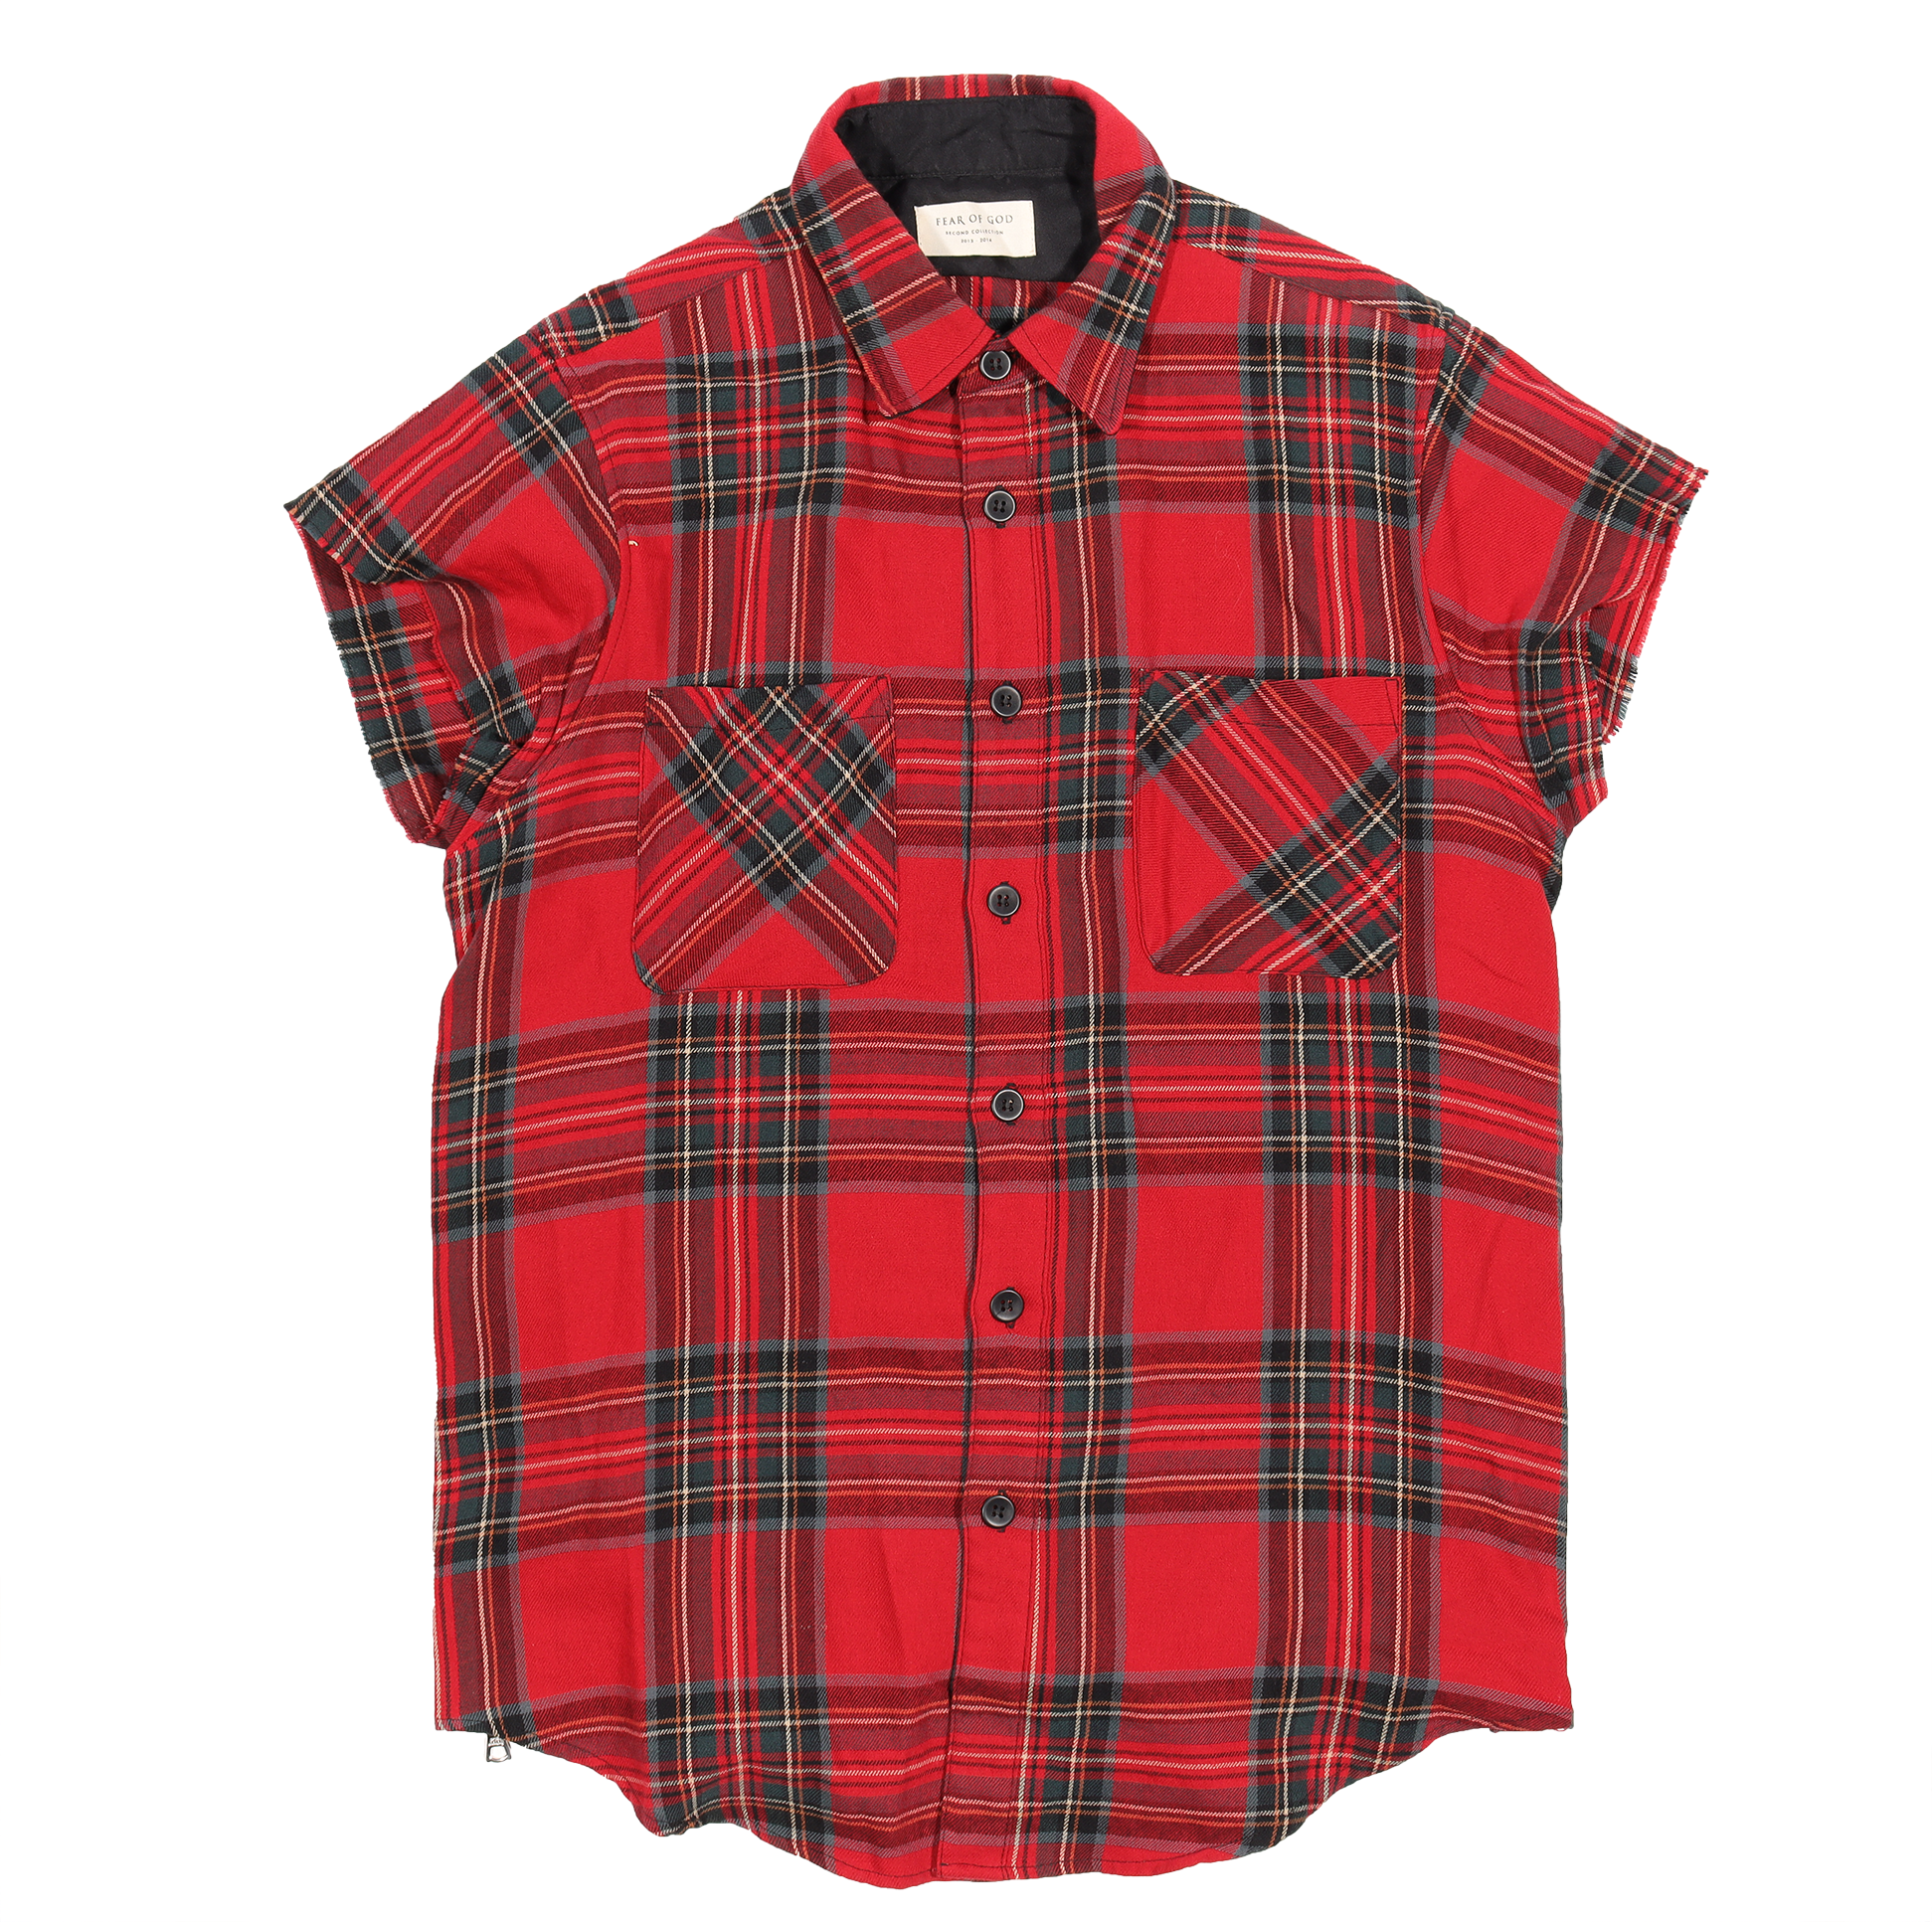 Second Collection Sleeveless Flannel Shirt